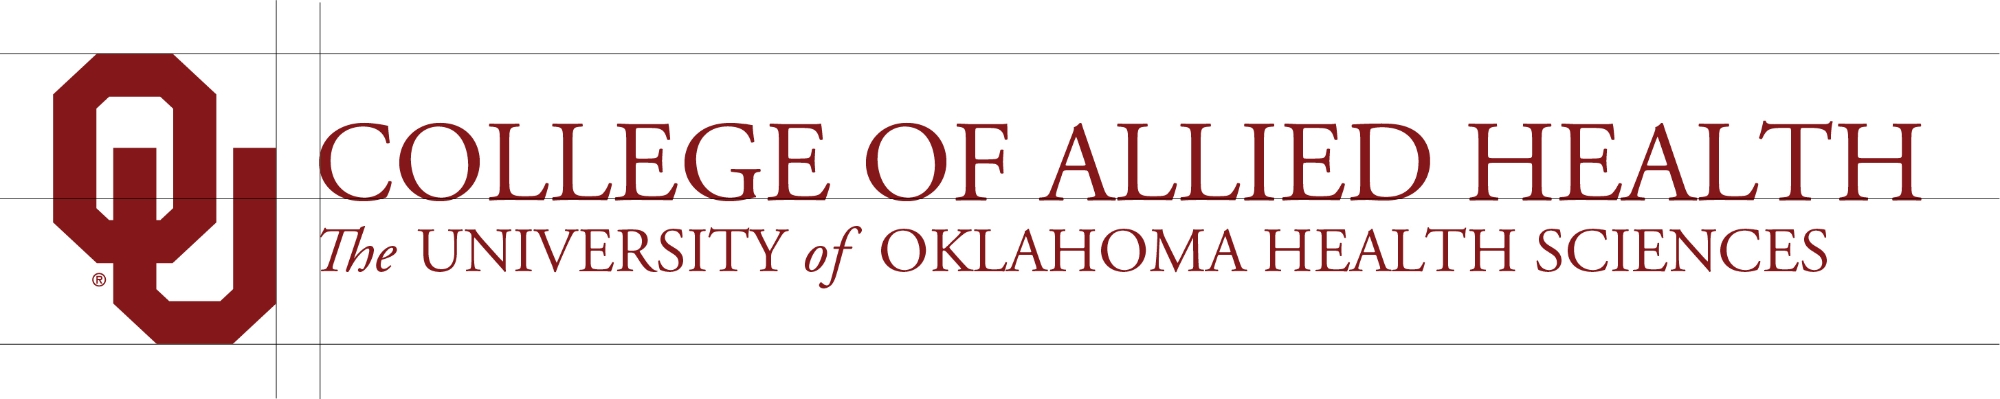 Interlocking OU, College of Allied Health, The University of Oklahoma Health Sciences wordmark, two-line example.